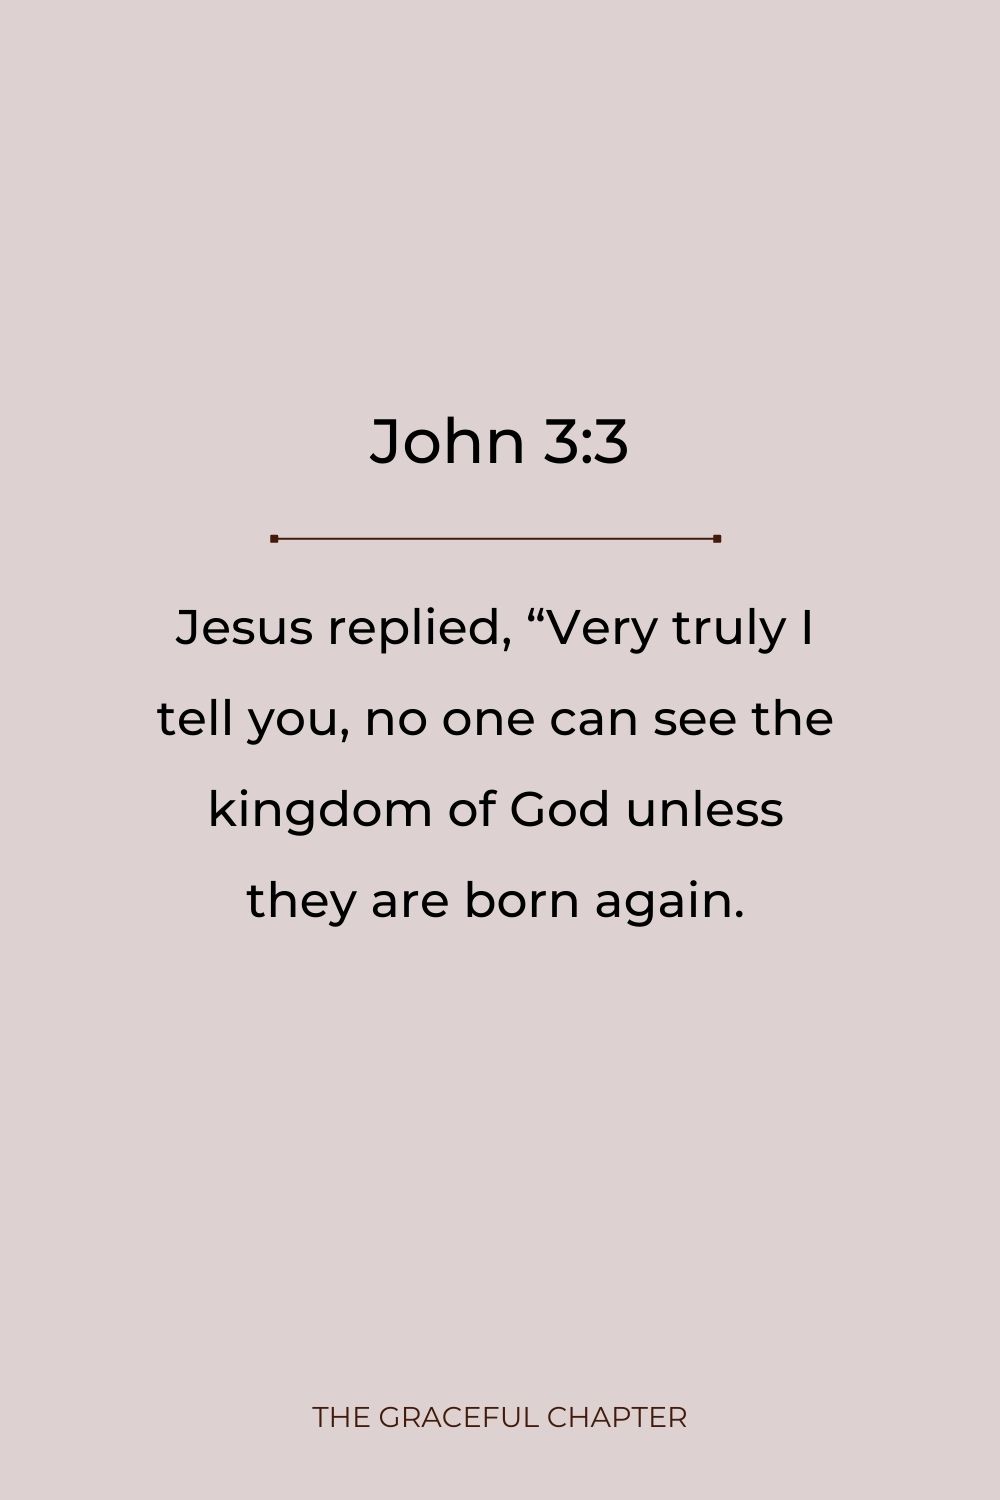 Jesus replied, “Very truly I tell you, no one can see the kingdom of God unless they are born again. John 3:3 being born again